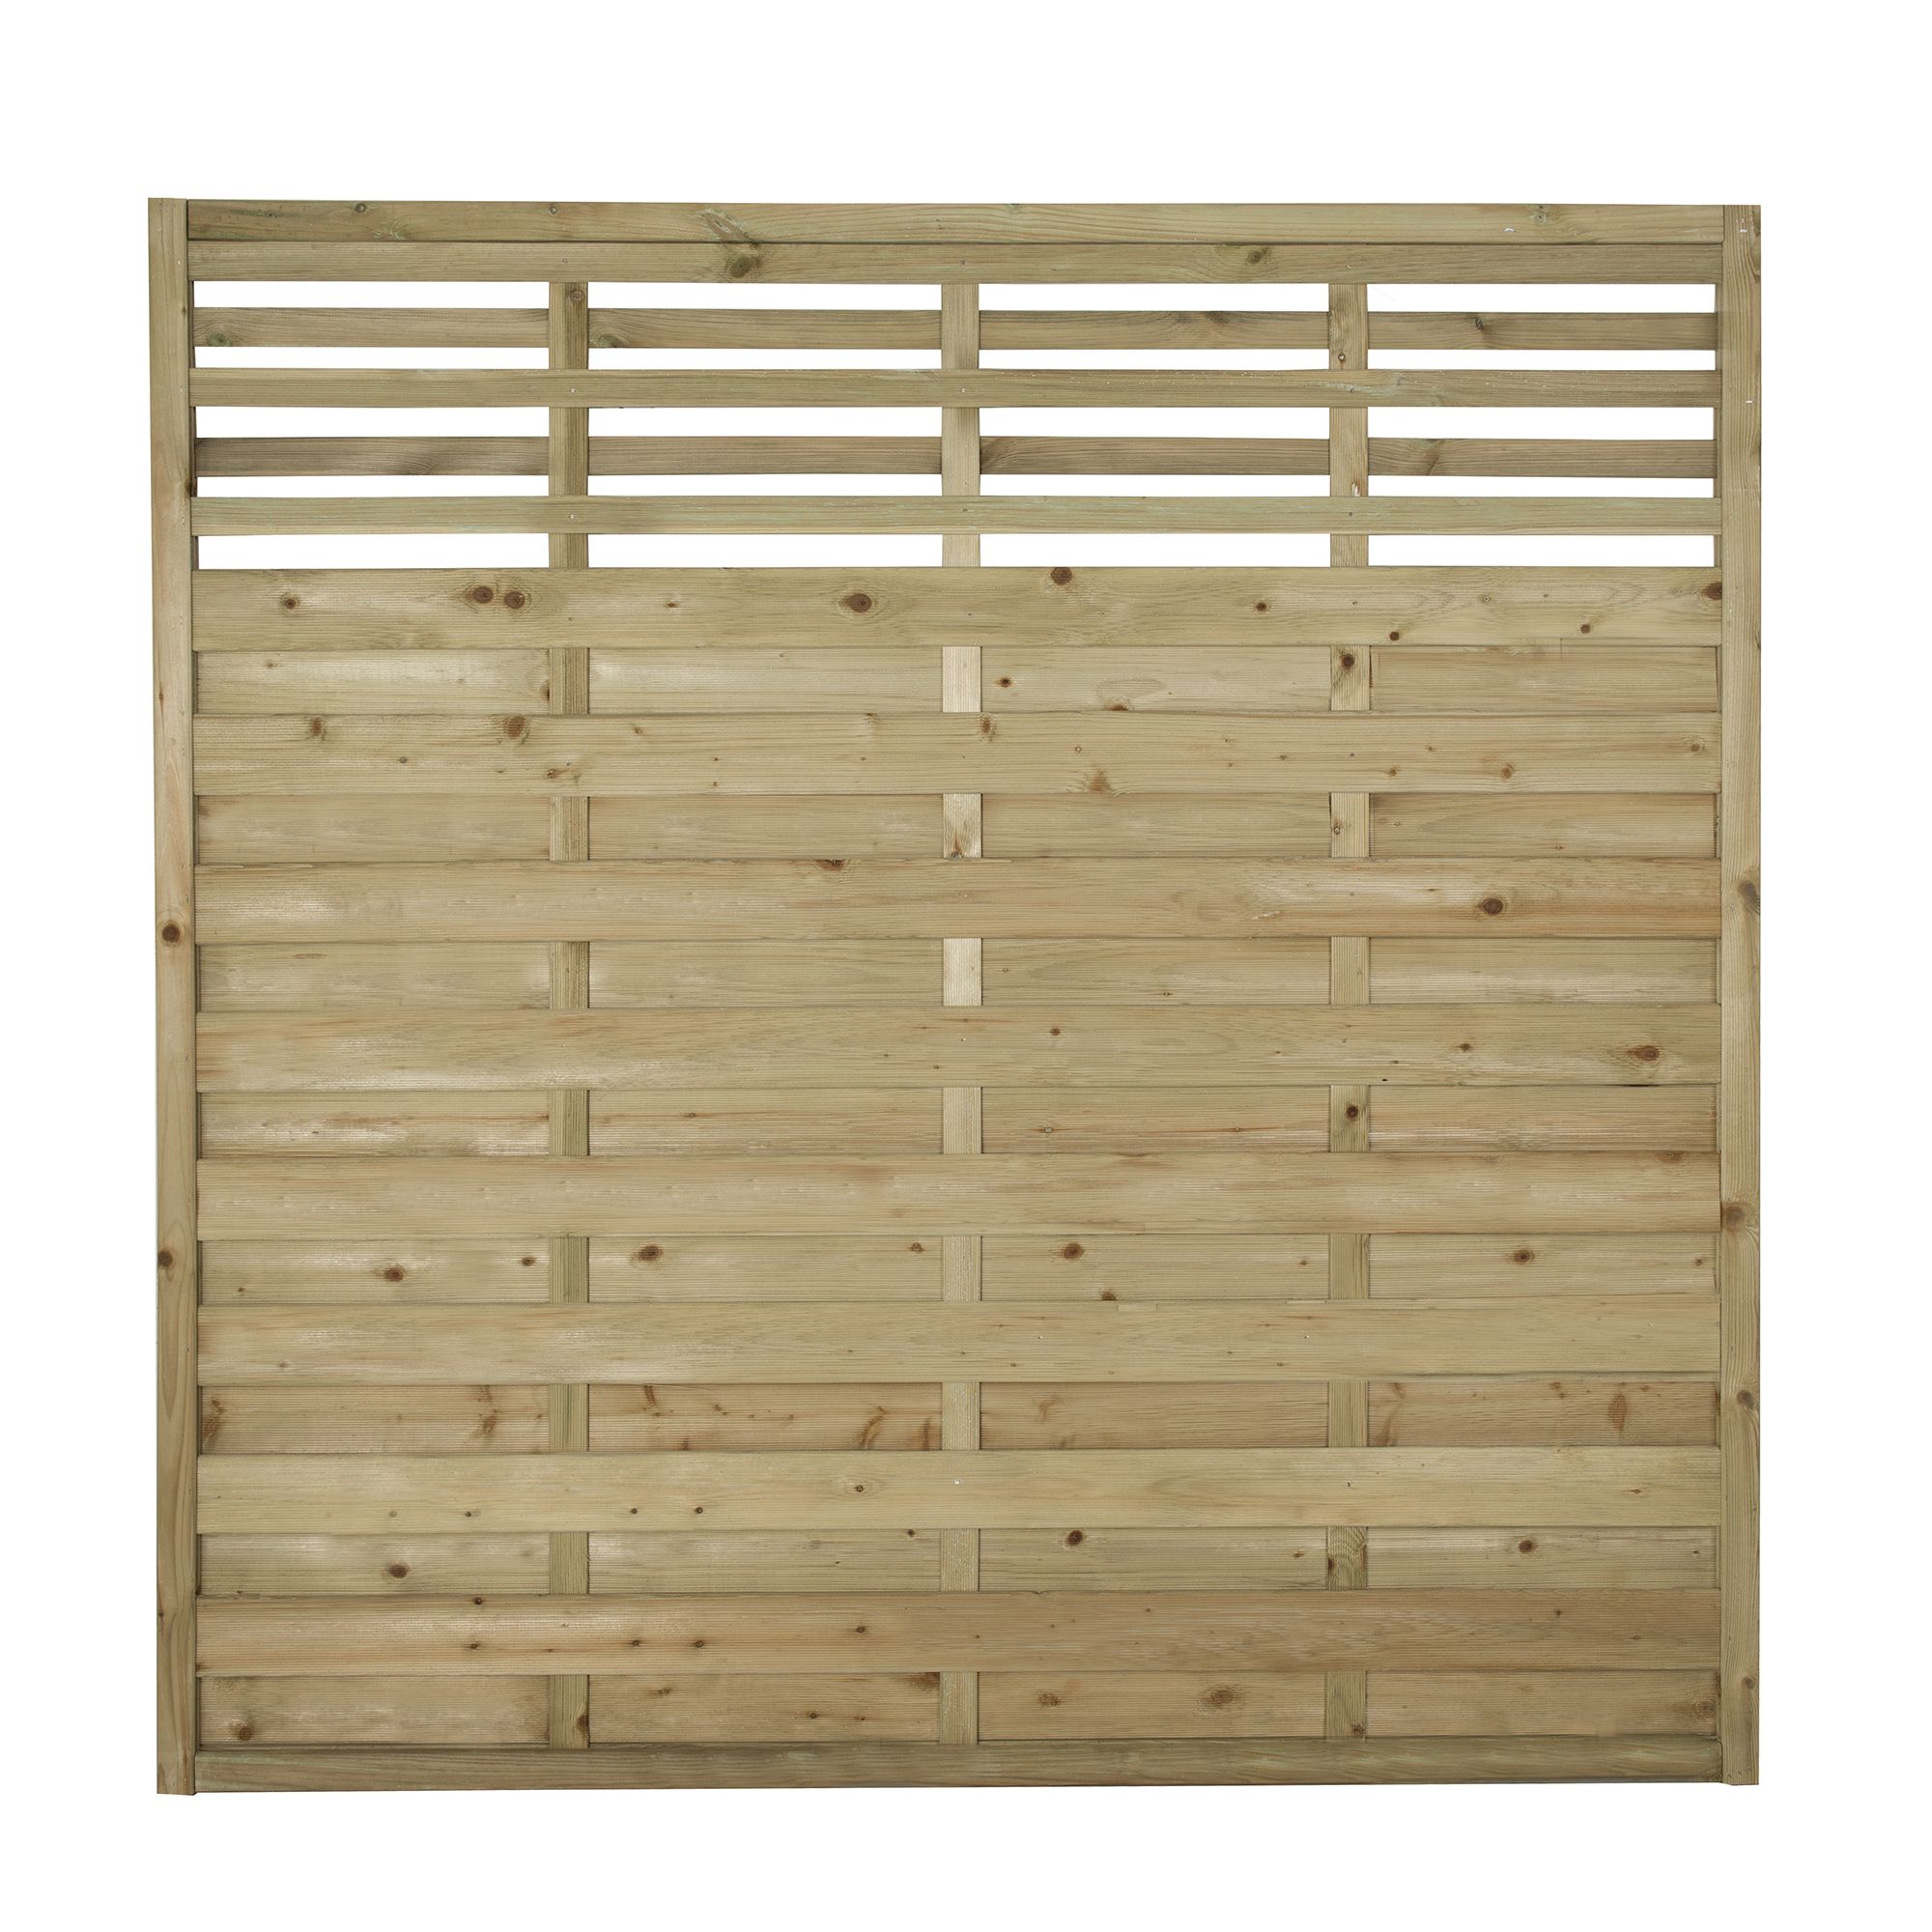 Forest Garden Contemporary Slatted Pressure treated Wooden Fence panel (W)1.8m (H)1.8m, Pack of 4